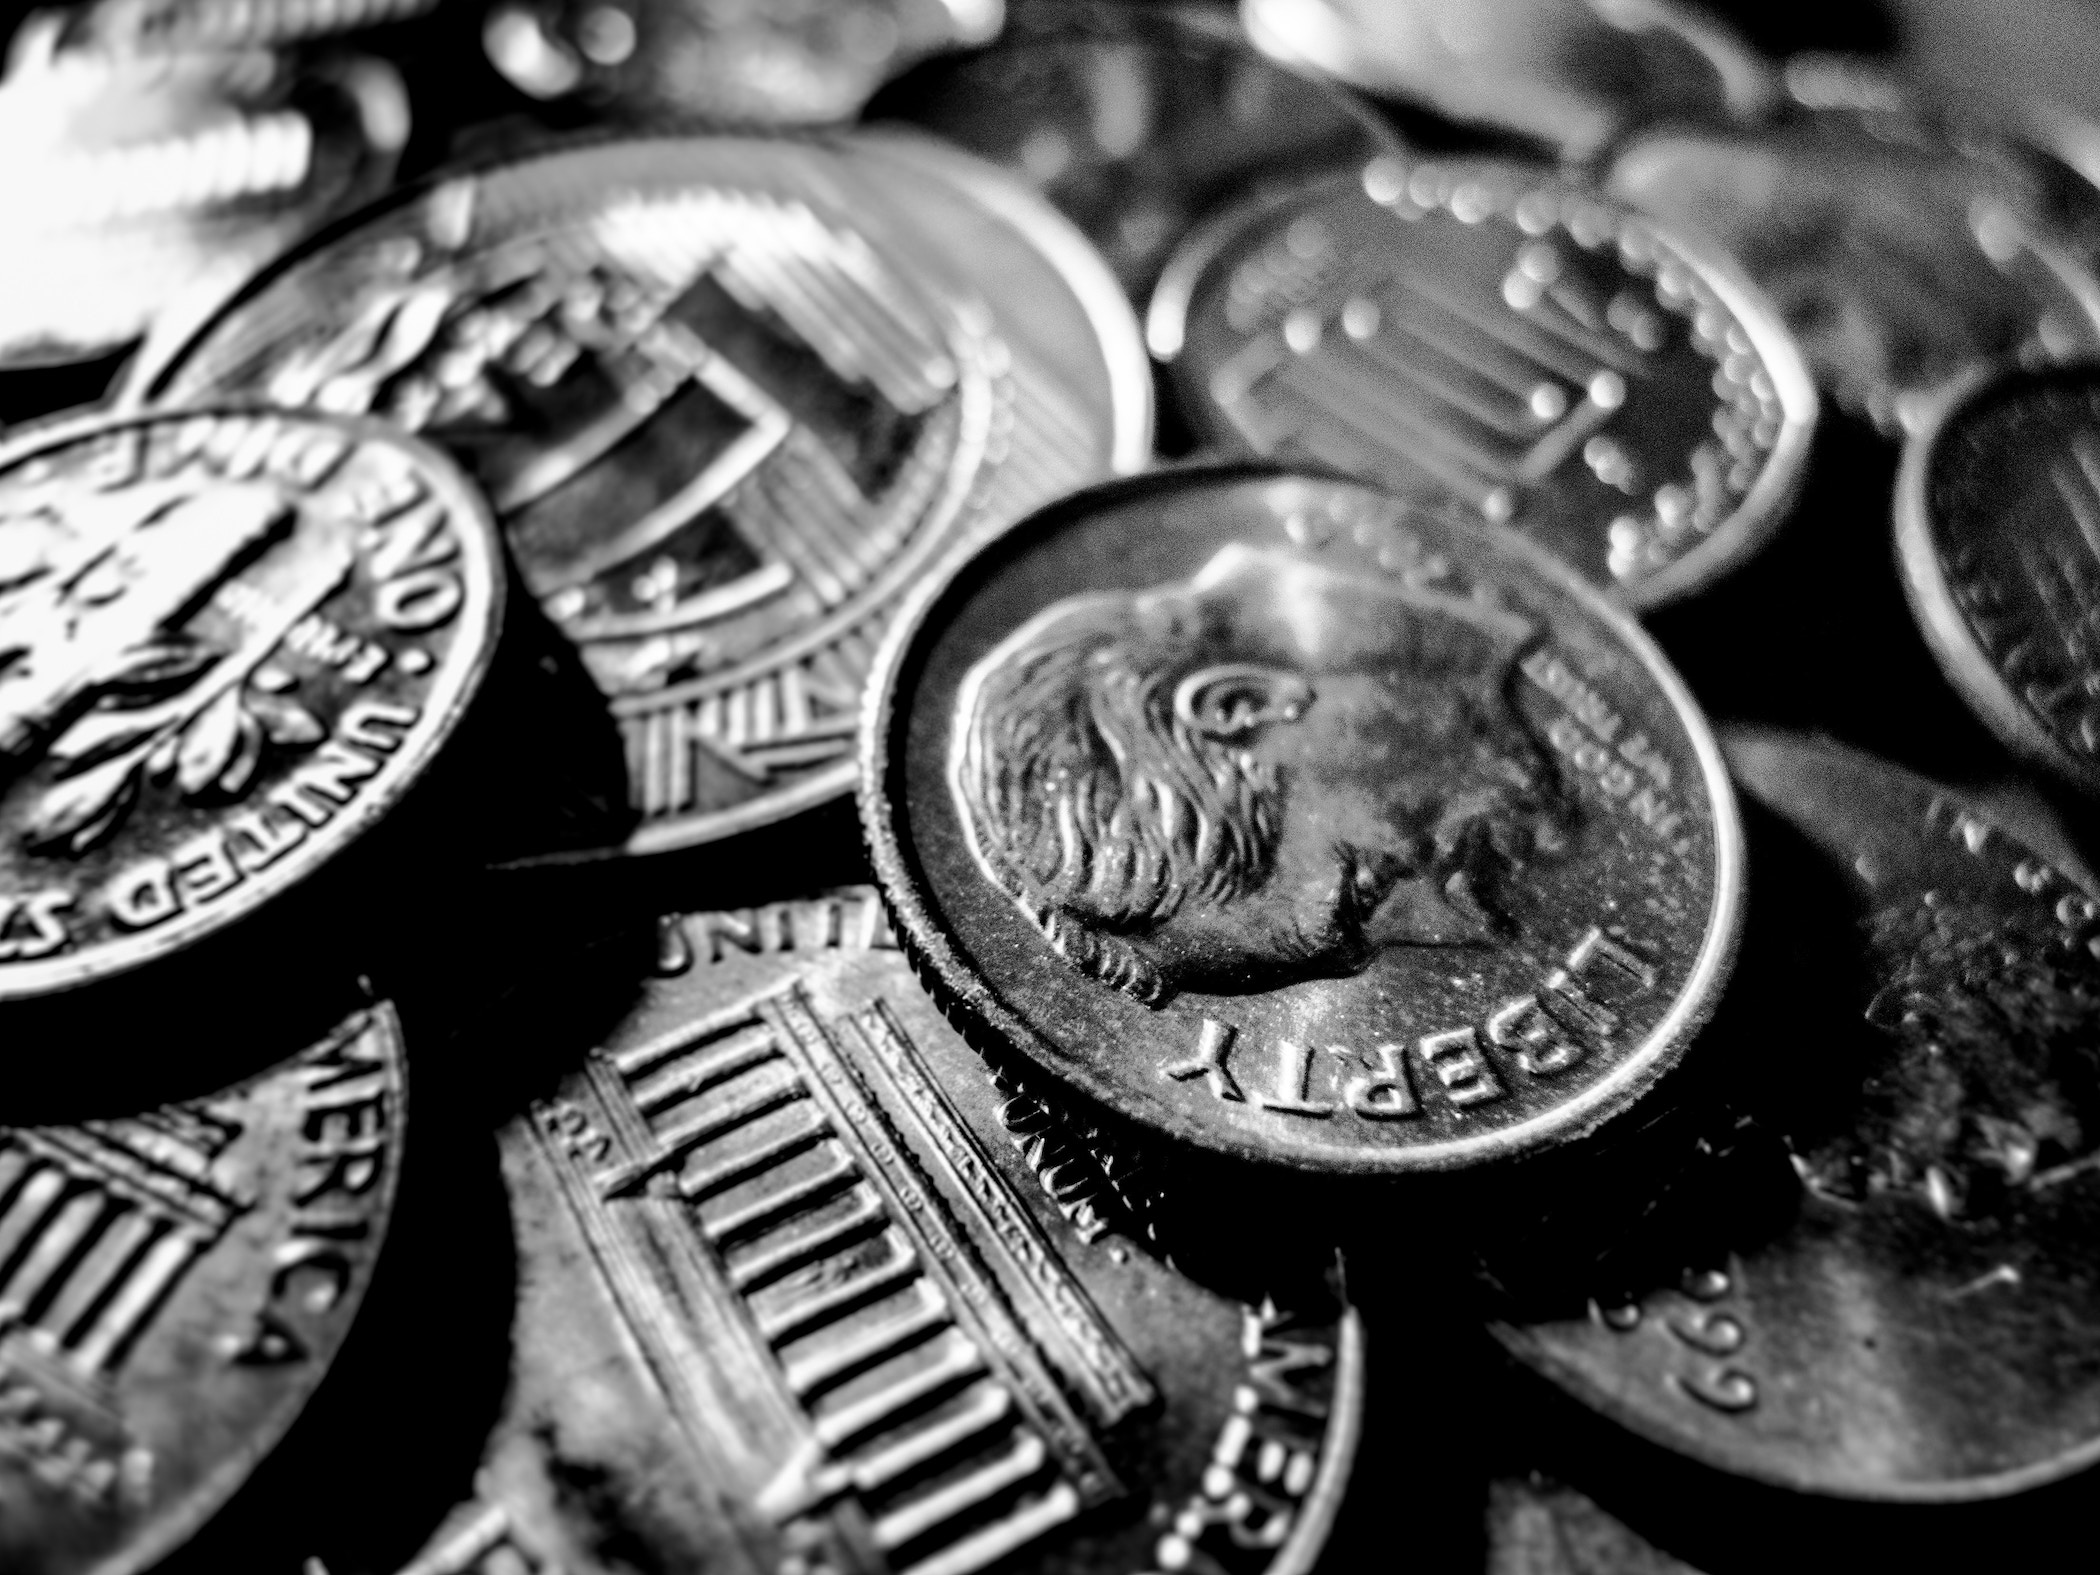 black and white image of coins